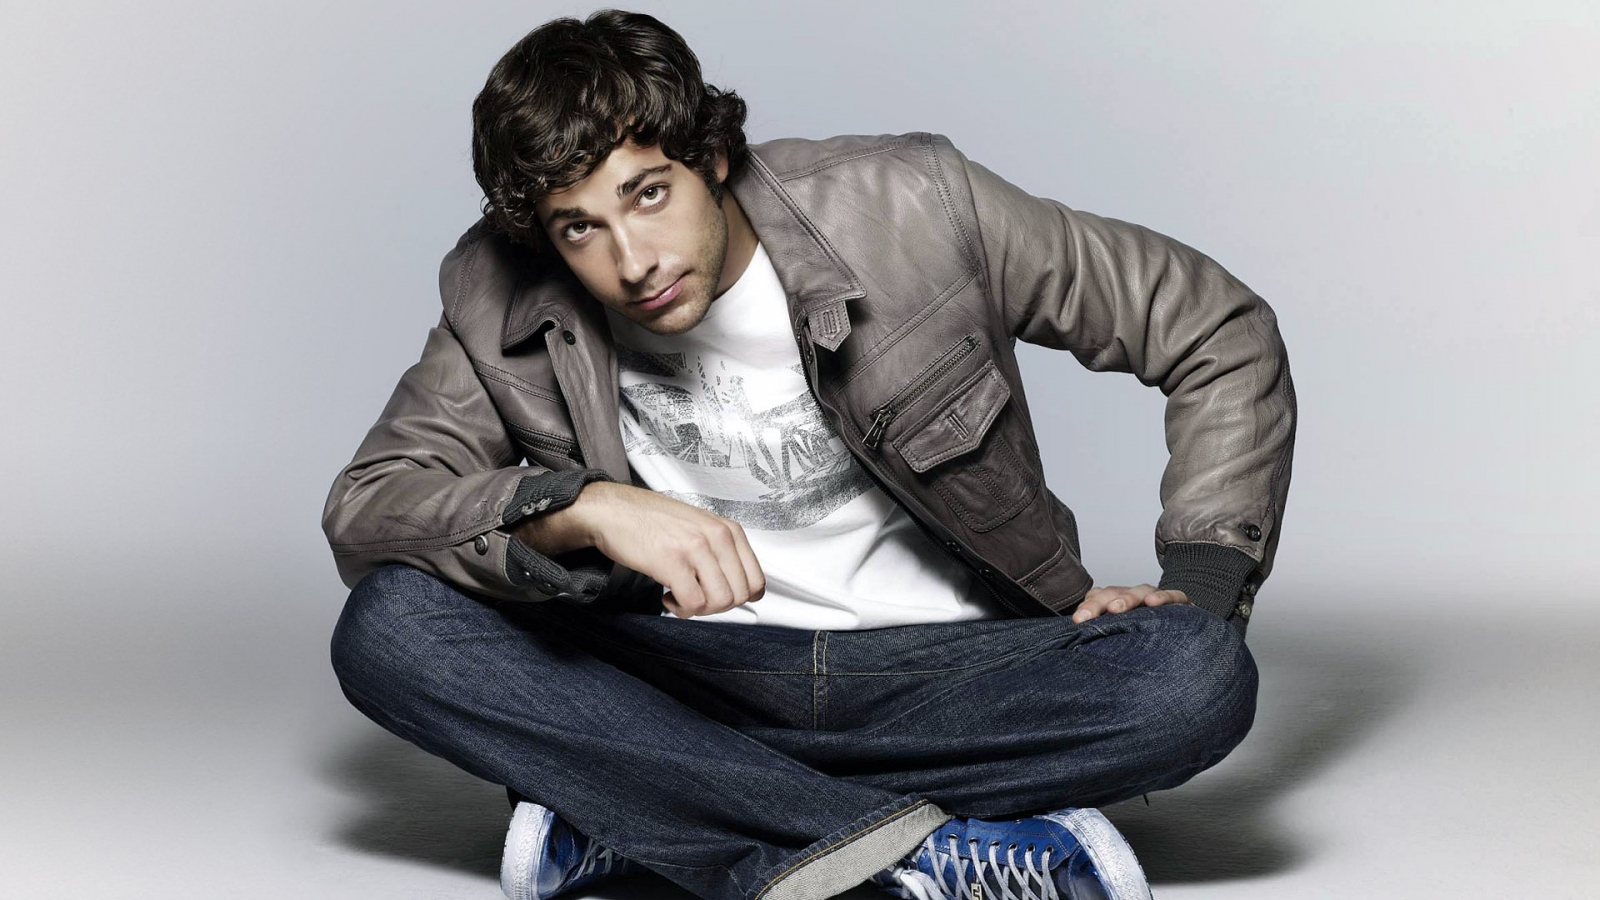 Zachary Levi Looking up for 1600 x 900 HDTV resolution